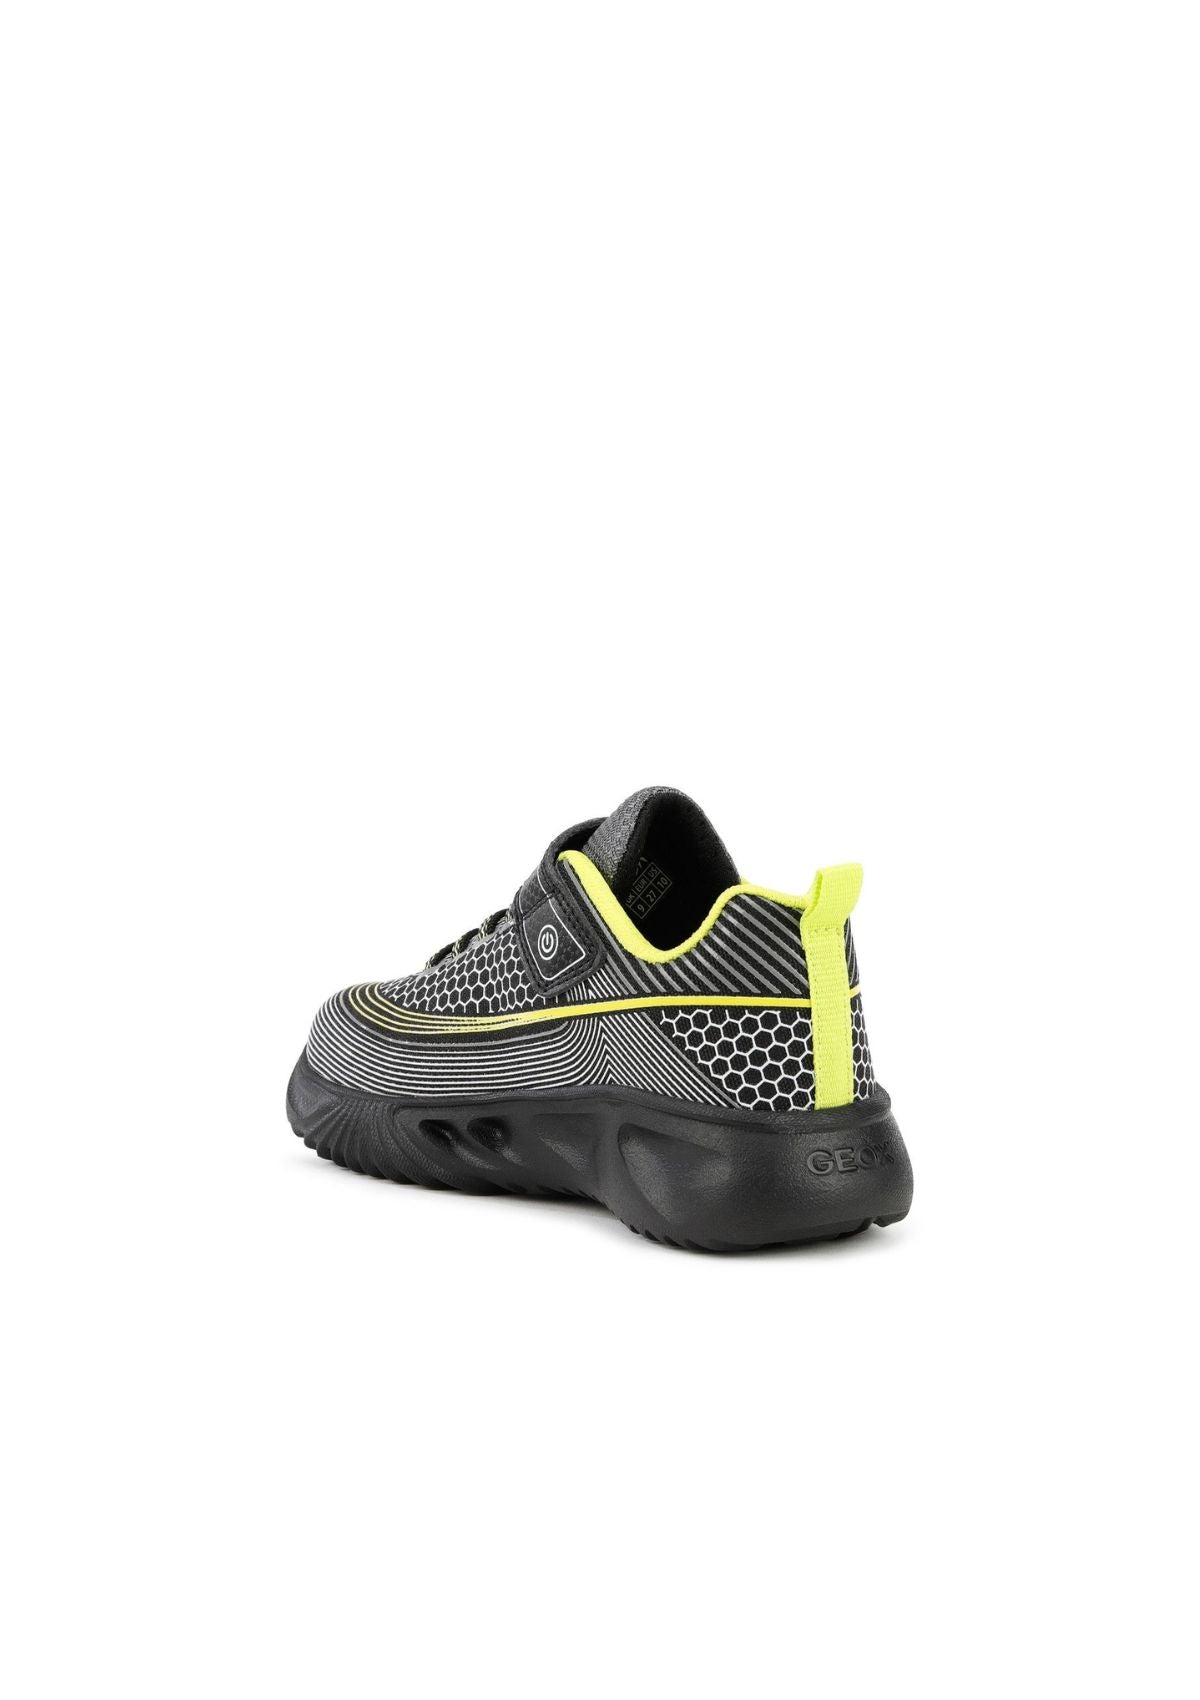 Geox Junior Boys ASSISTERS Black Lime Back